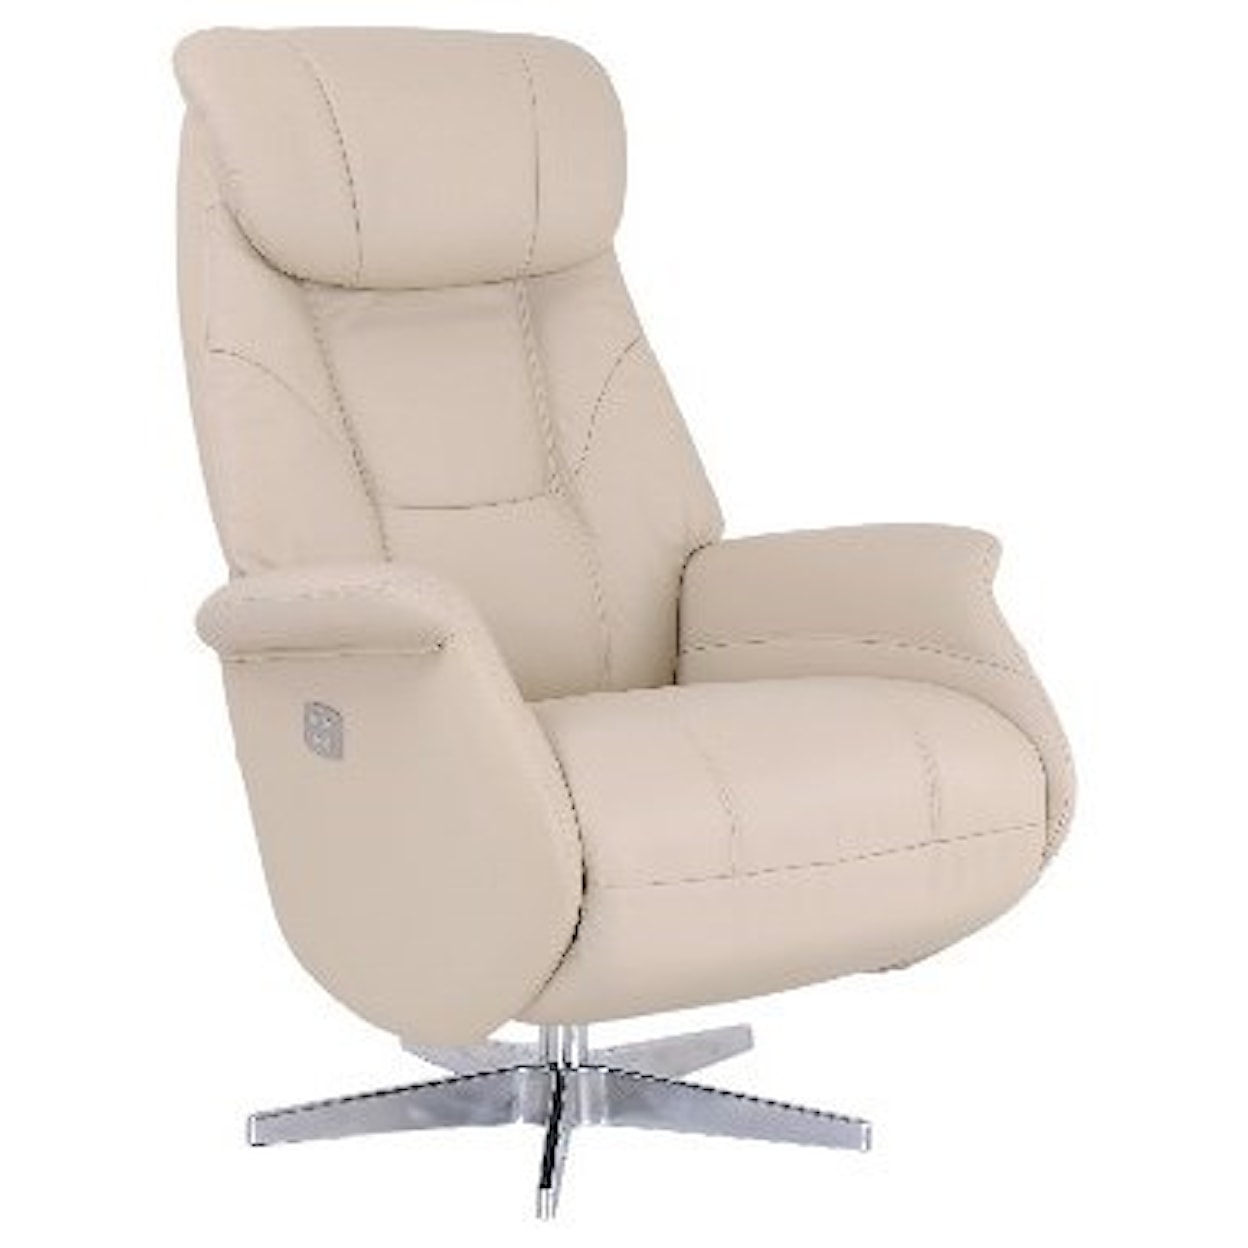 Benchmaster Monarch Power Reclining Chair